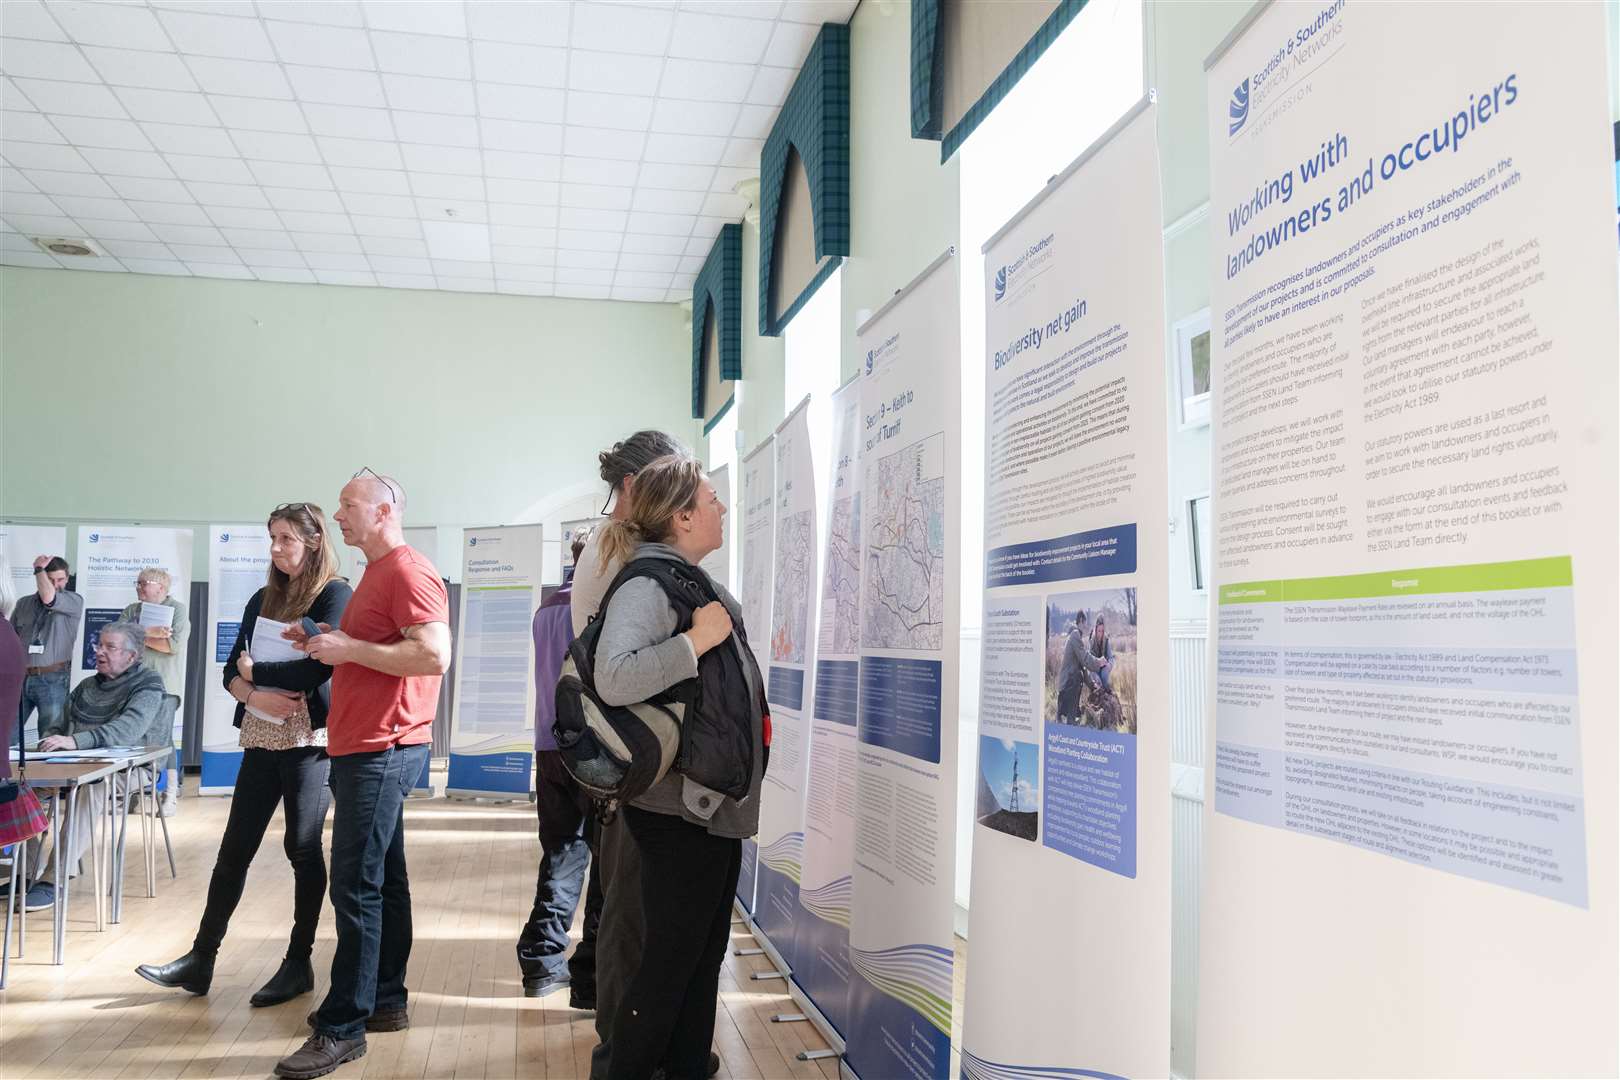 A public consultation was held by SSEN for the Beauly-Blackhillock-New Deer-Peterhead overhead line development electricity infrastructure project at Longmore Community Hall in Keith. ..Picture: Beth Taylor.